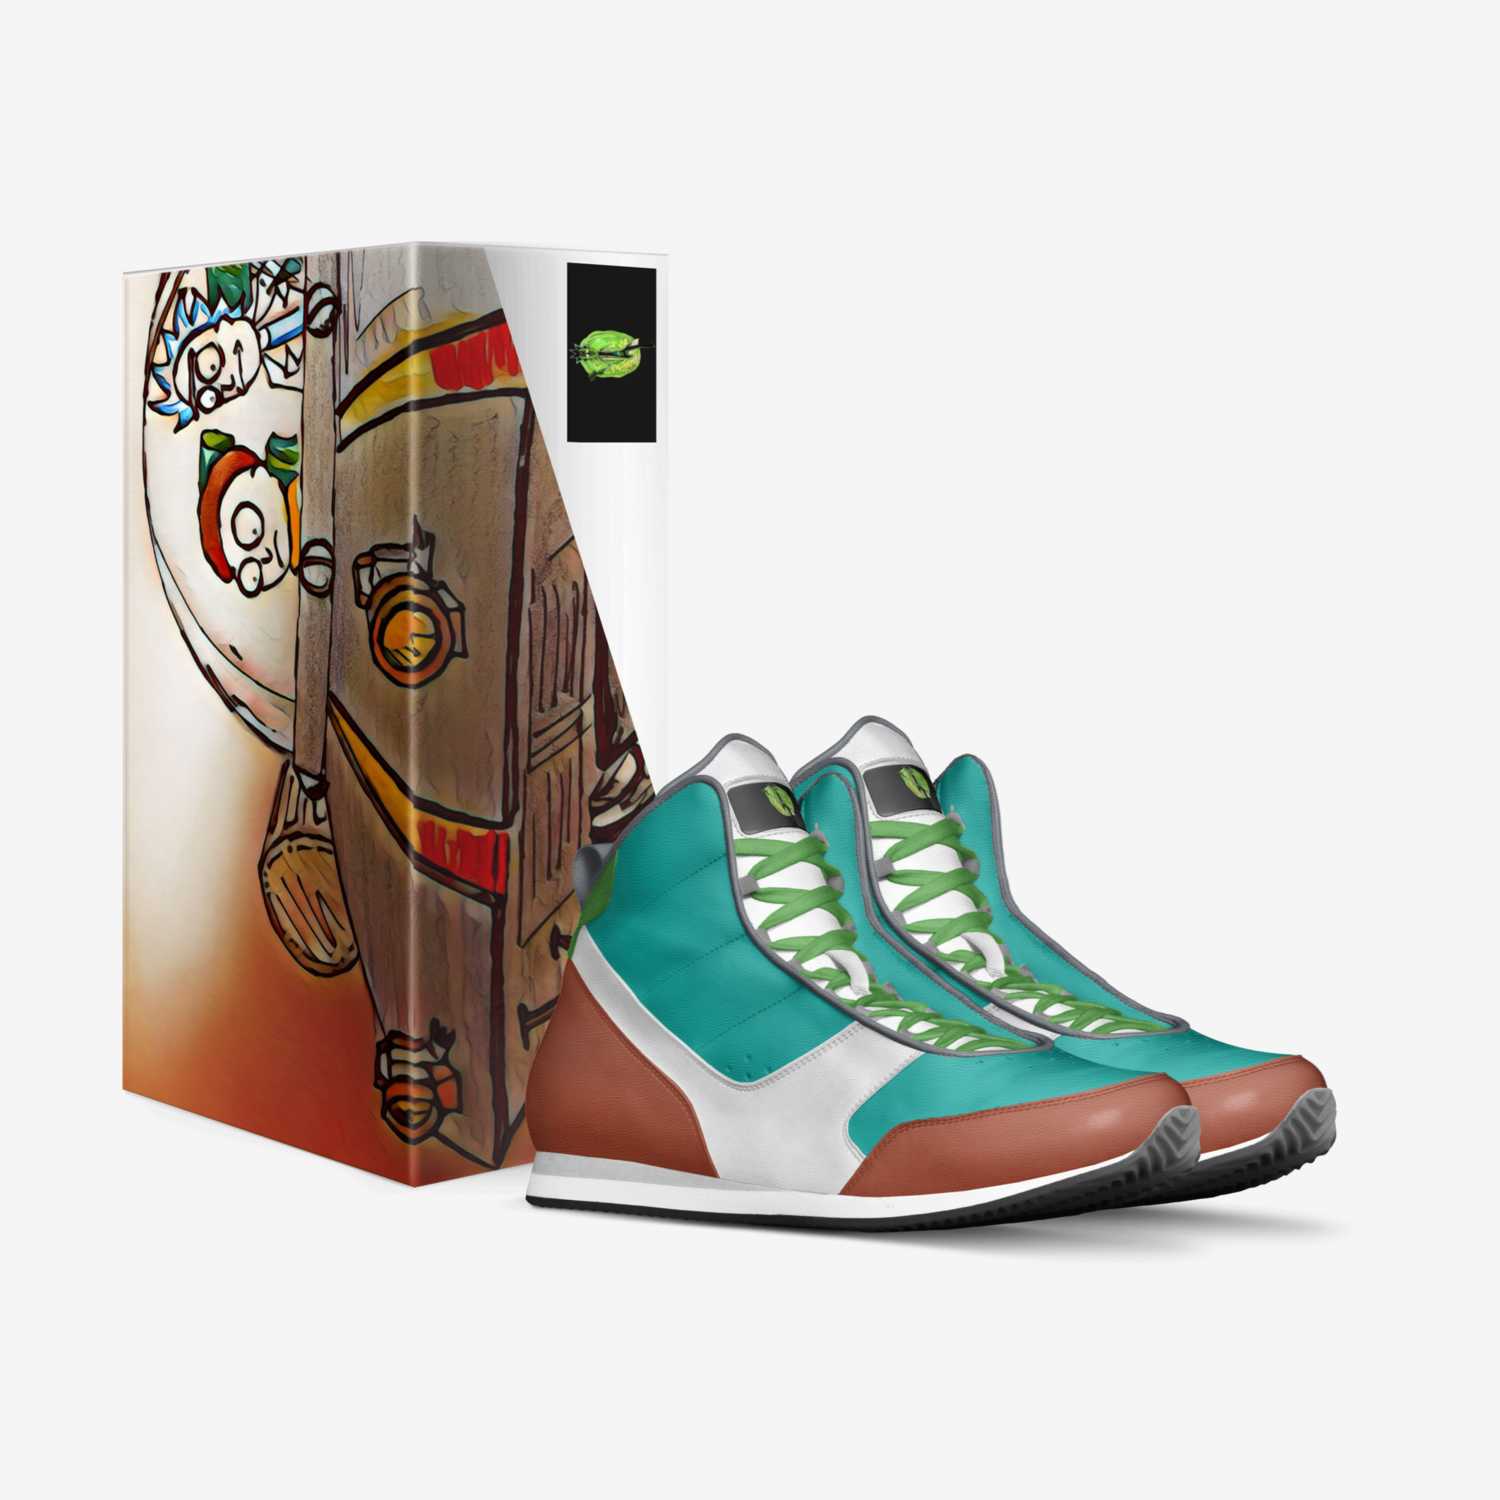 Gamer custom made in Italy shoes by Manny Cortes | Box view